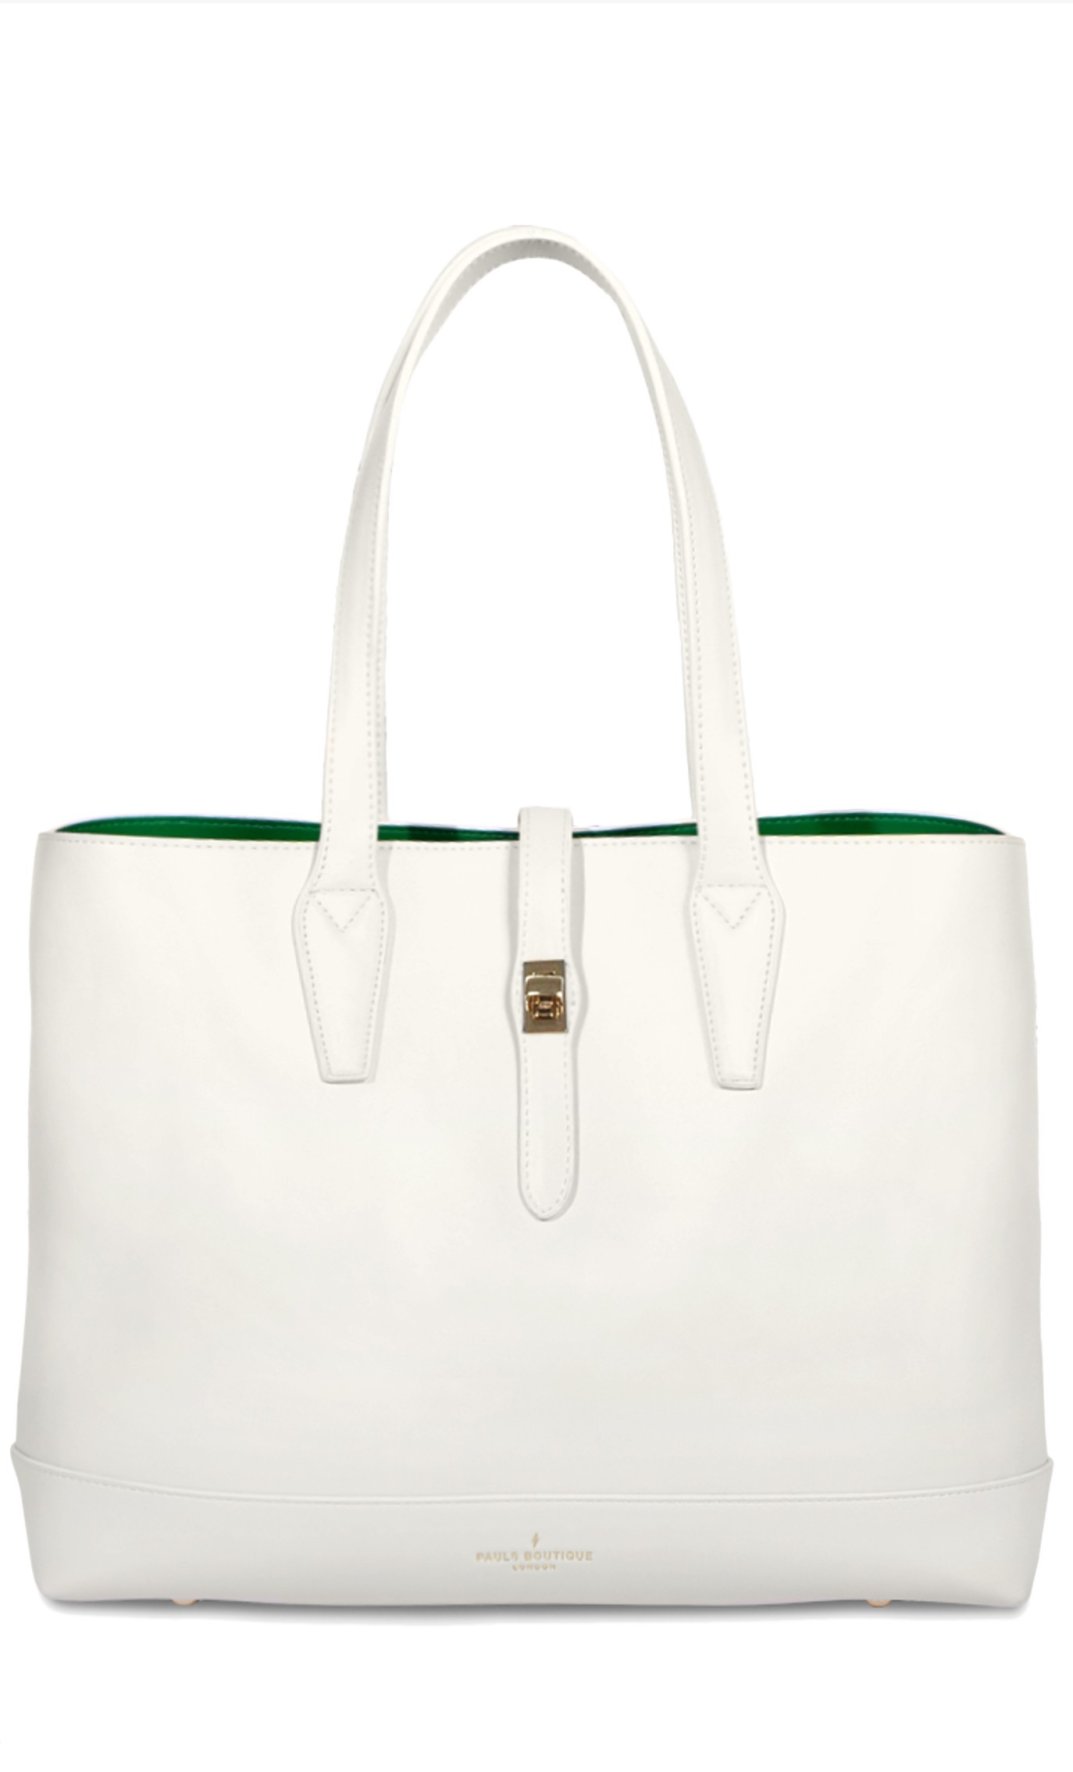 Women's PAULS BOUTIQUE London Tote bags from £64